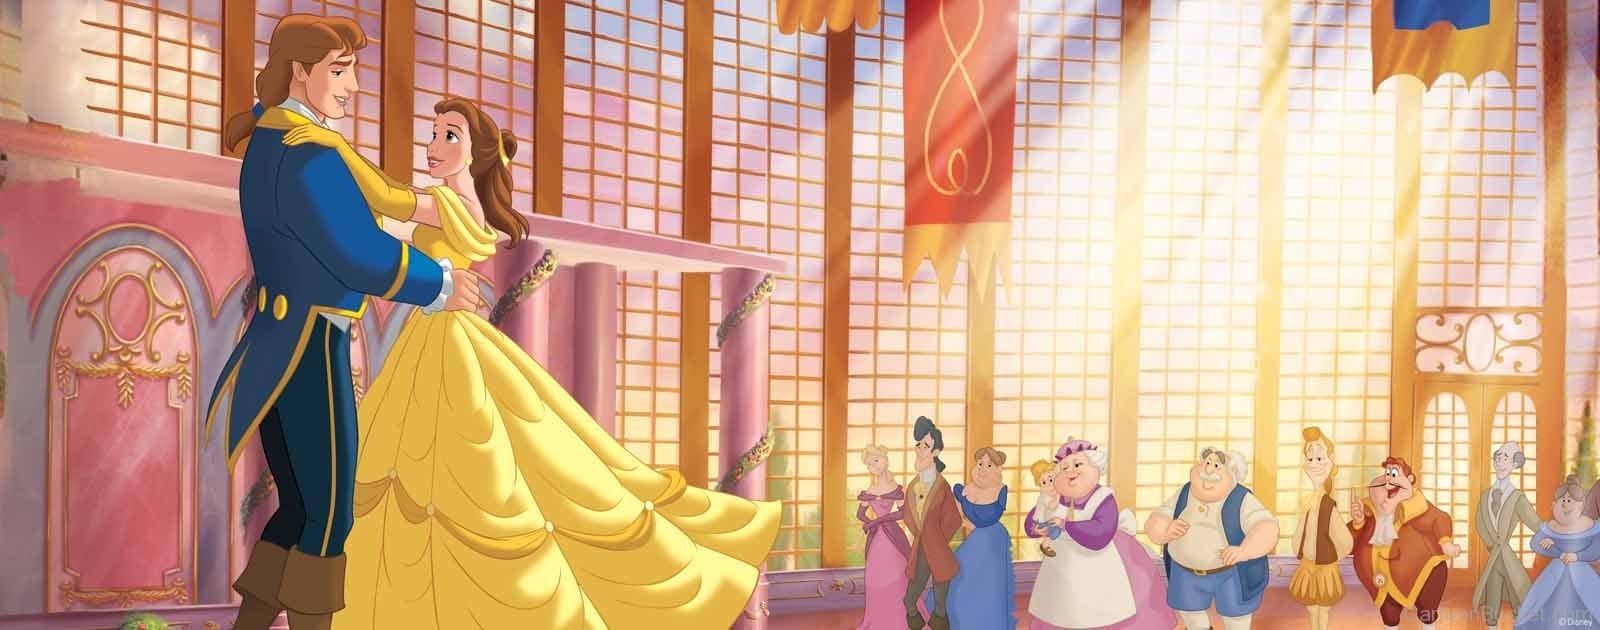 Beauty and the Beast The true story - Animation Video